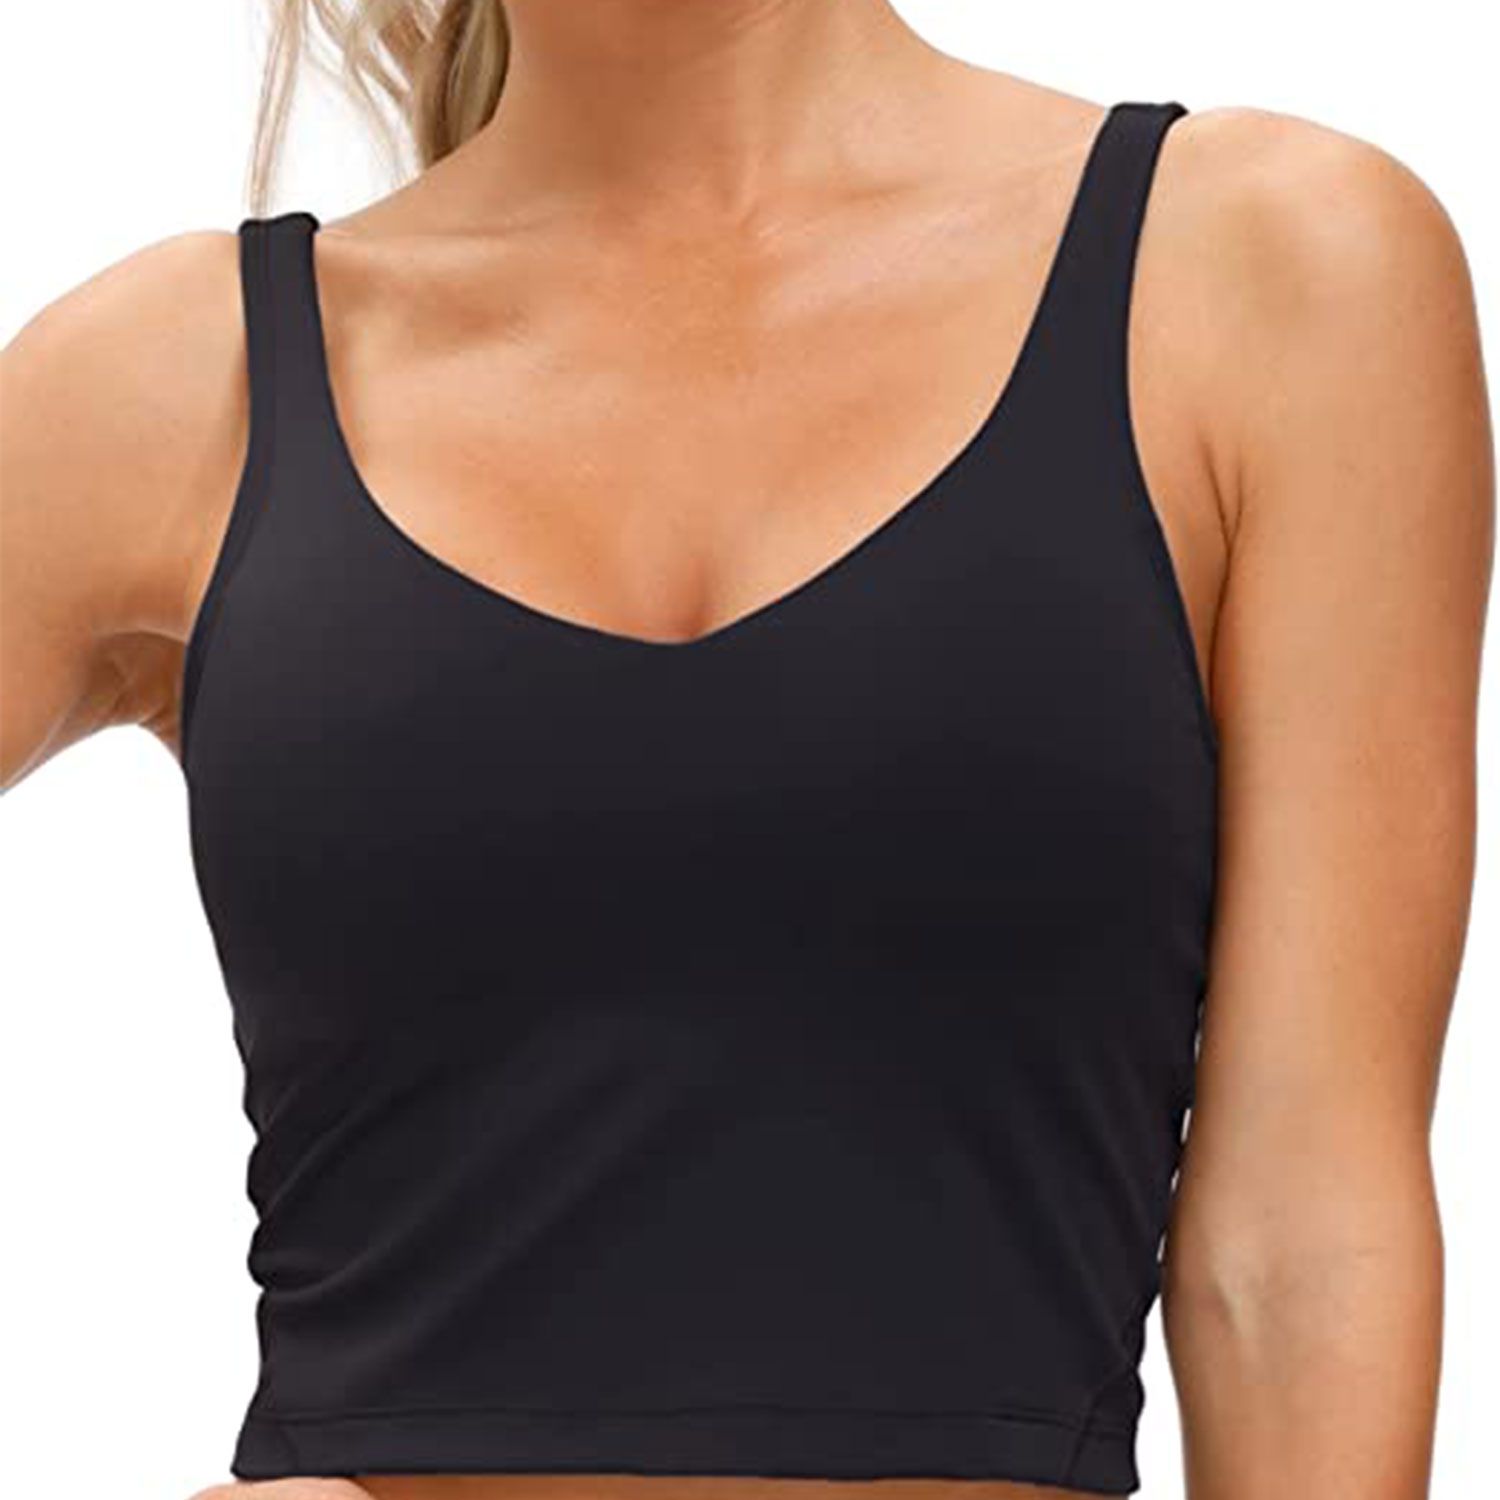 TruLivs Women's Sports Bras Seamless Longline Sports Bra for Women Pack with Removable Pad S M L XL